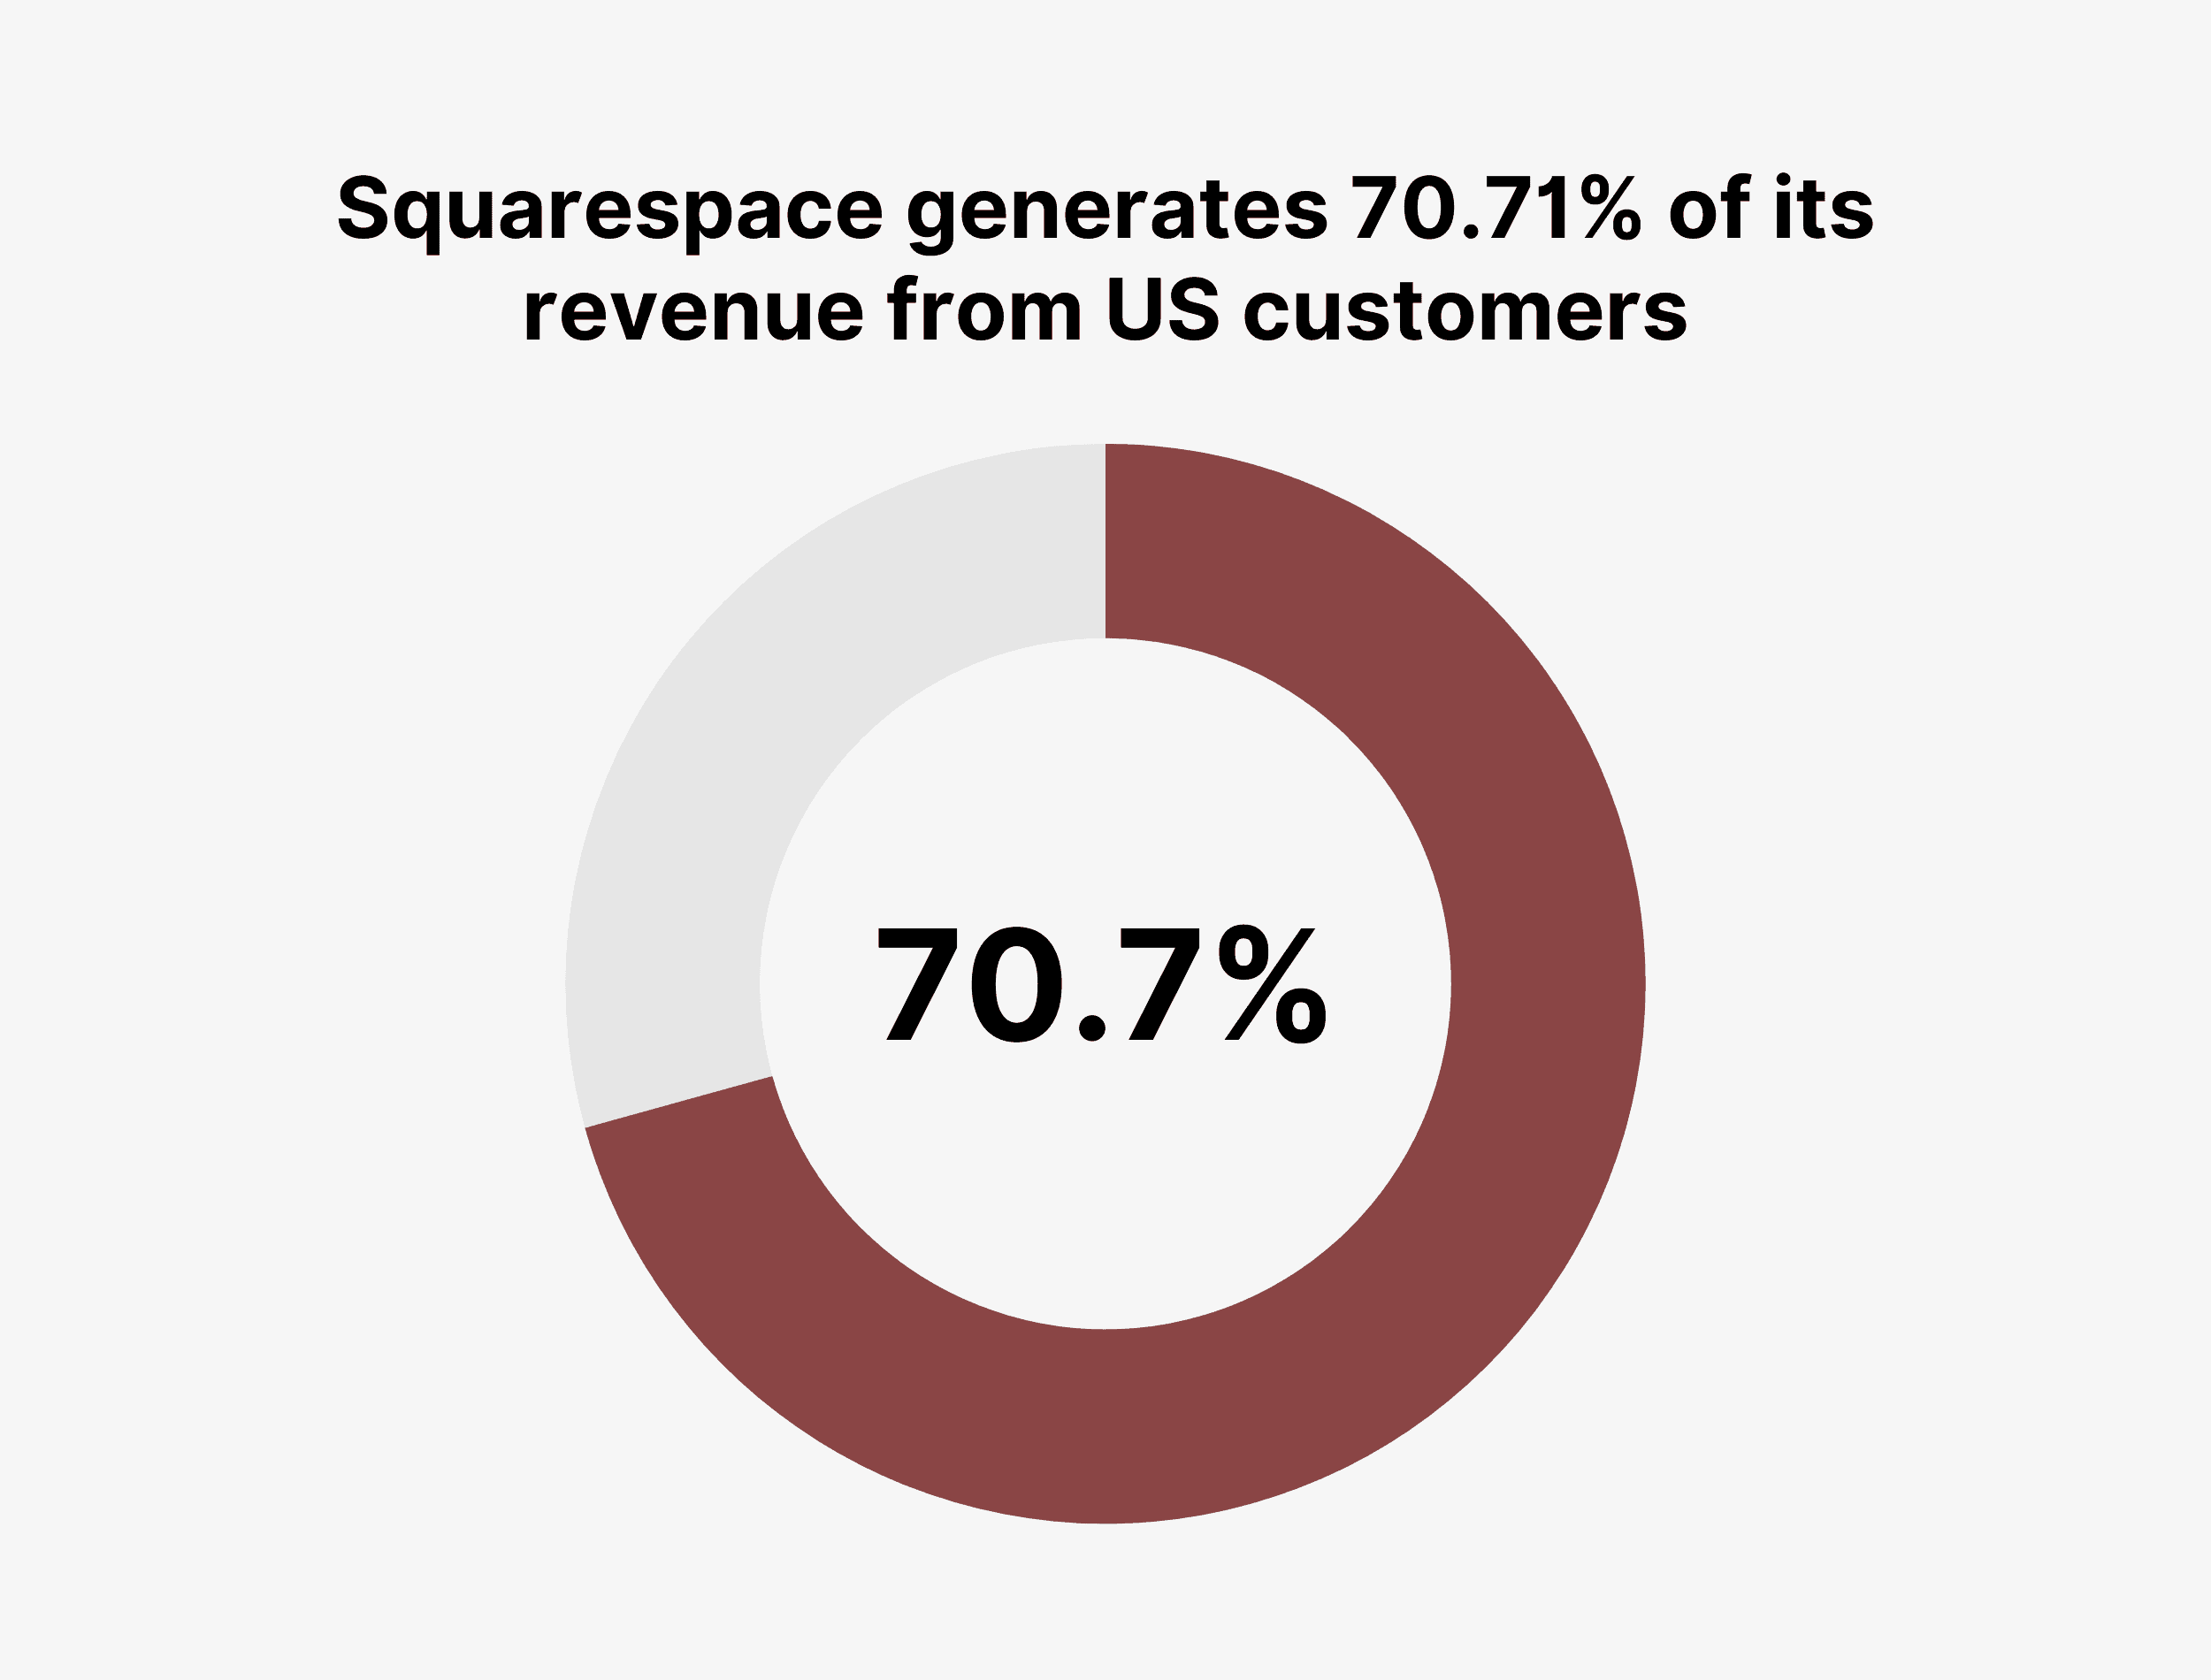 Squarespace generates 70.71% of its revenue from US customers